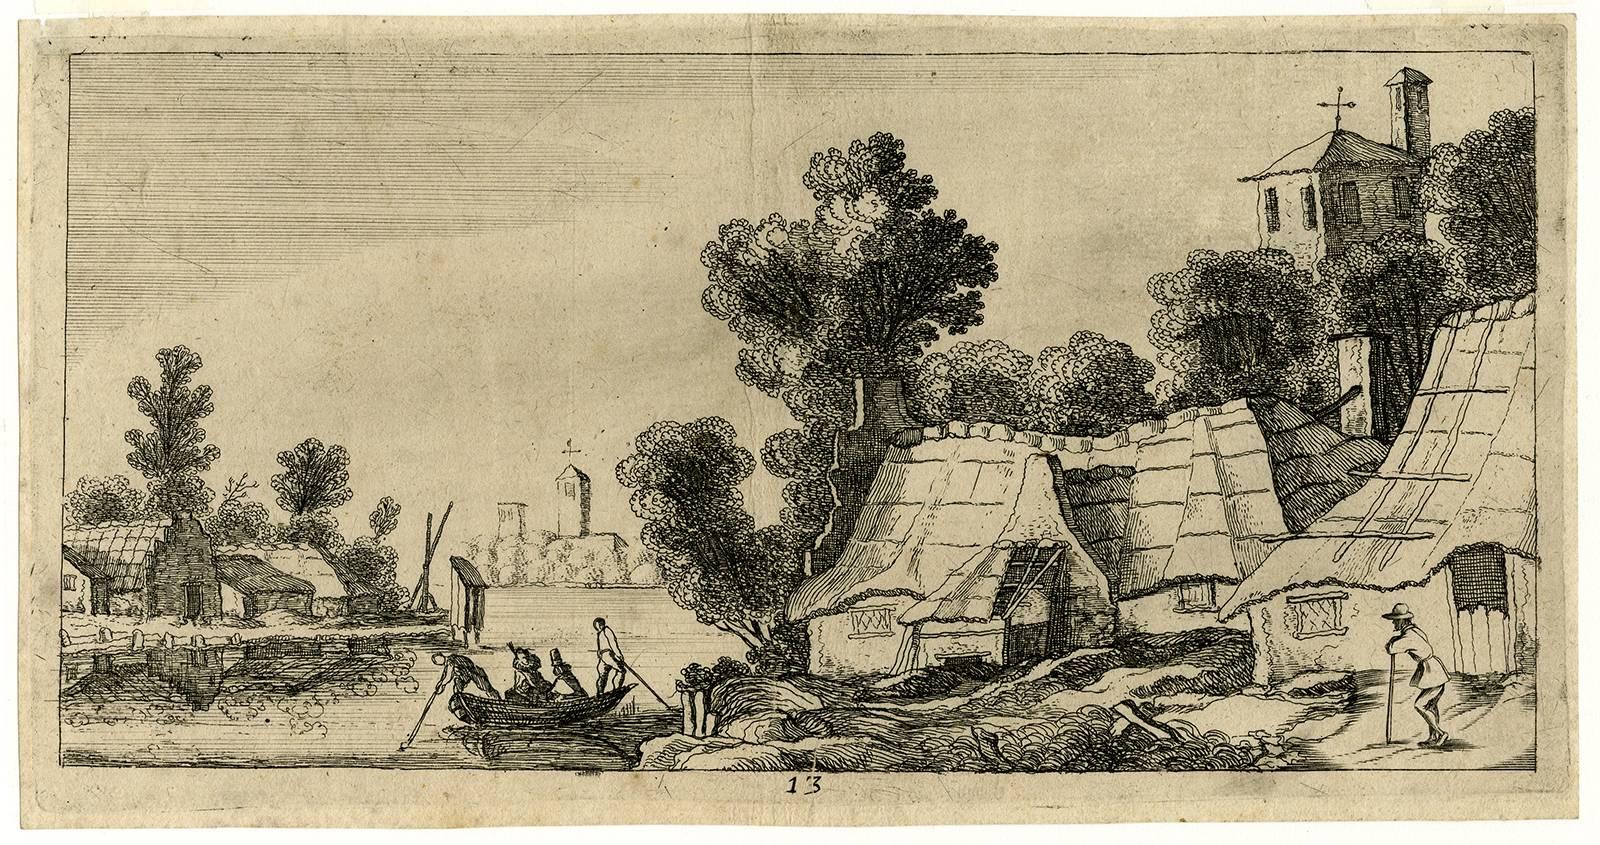 Claude Savary & Barthelemy Gaultier Landscape Print - Untitled - A river with boat and a village with farms.